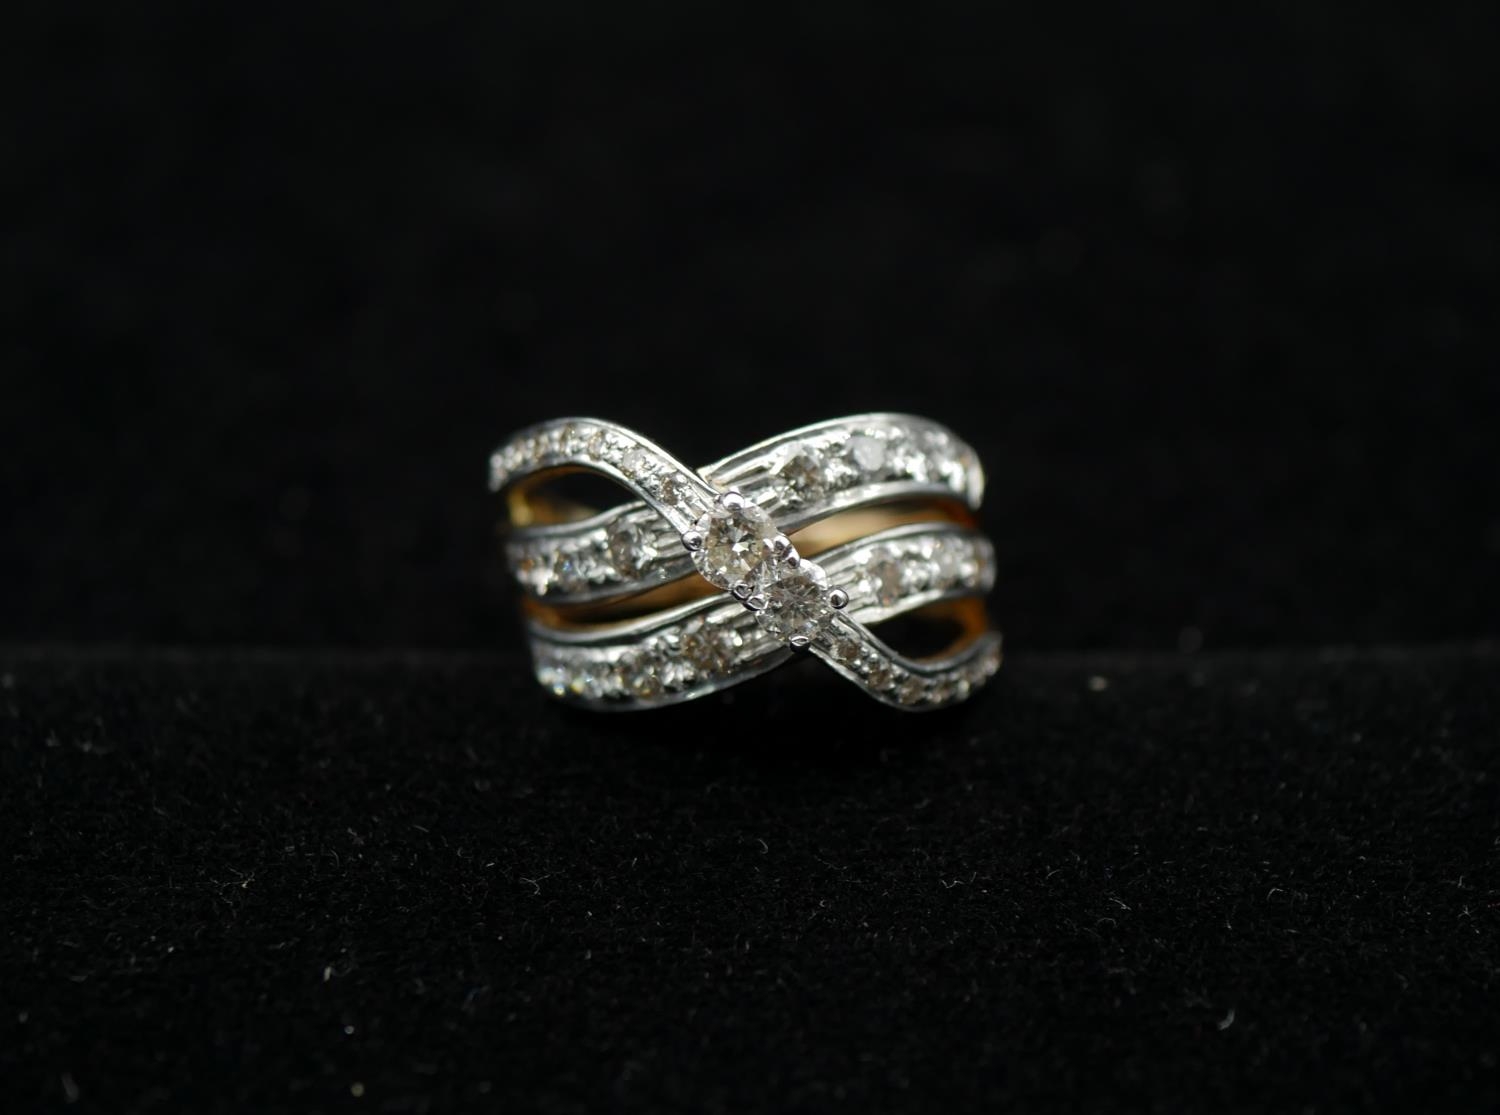 An 18 carat yellow and white gold and diamond two stone cross over ring, set with a combined